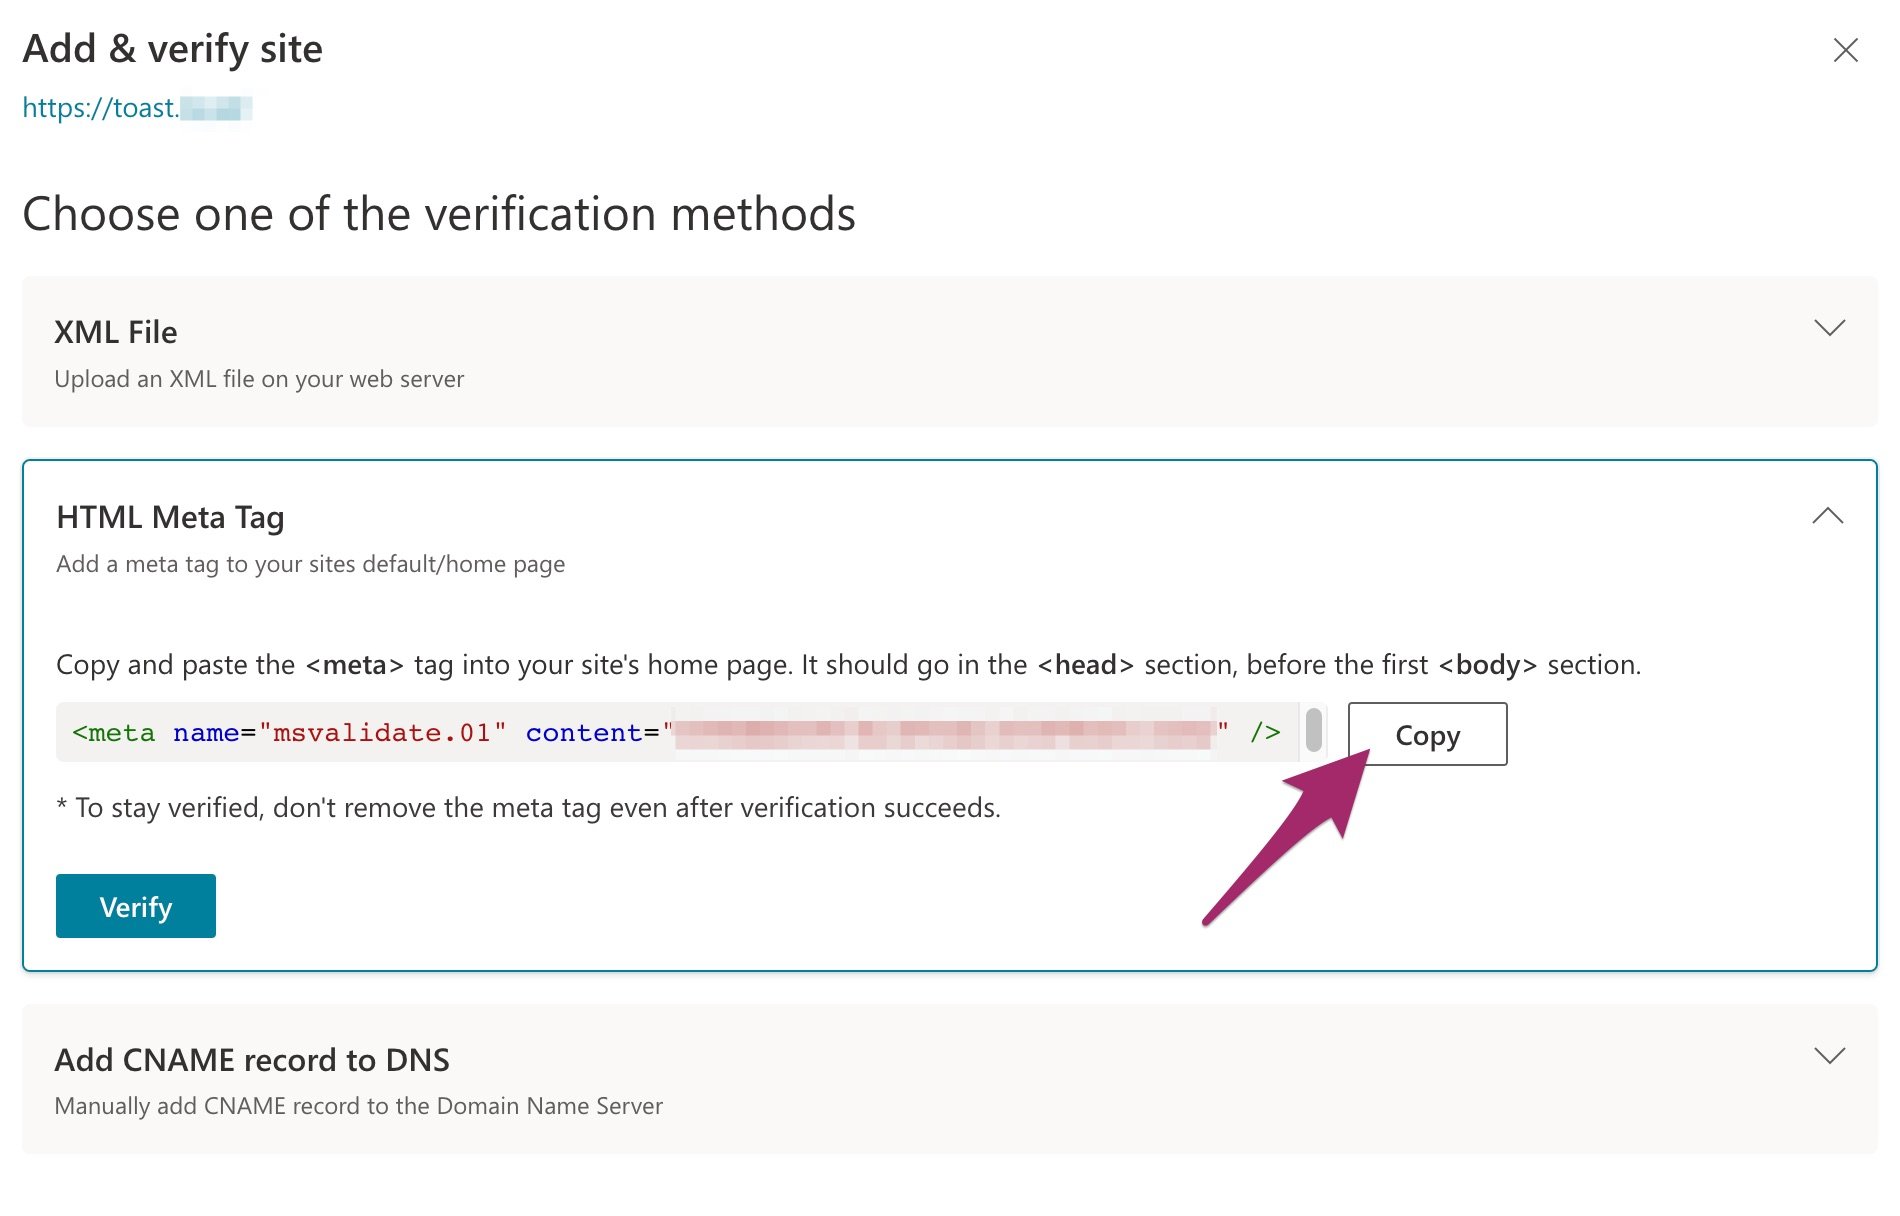 Screenshot of the "Copy" button in Bing Webmaster Tools